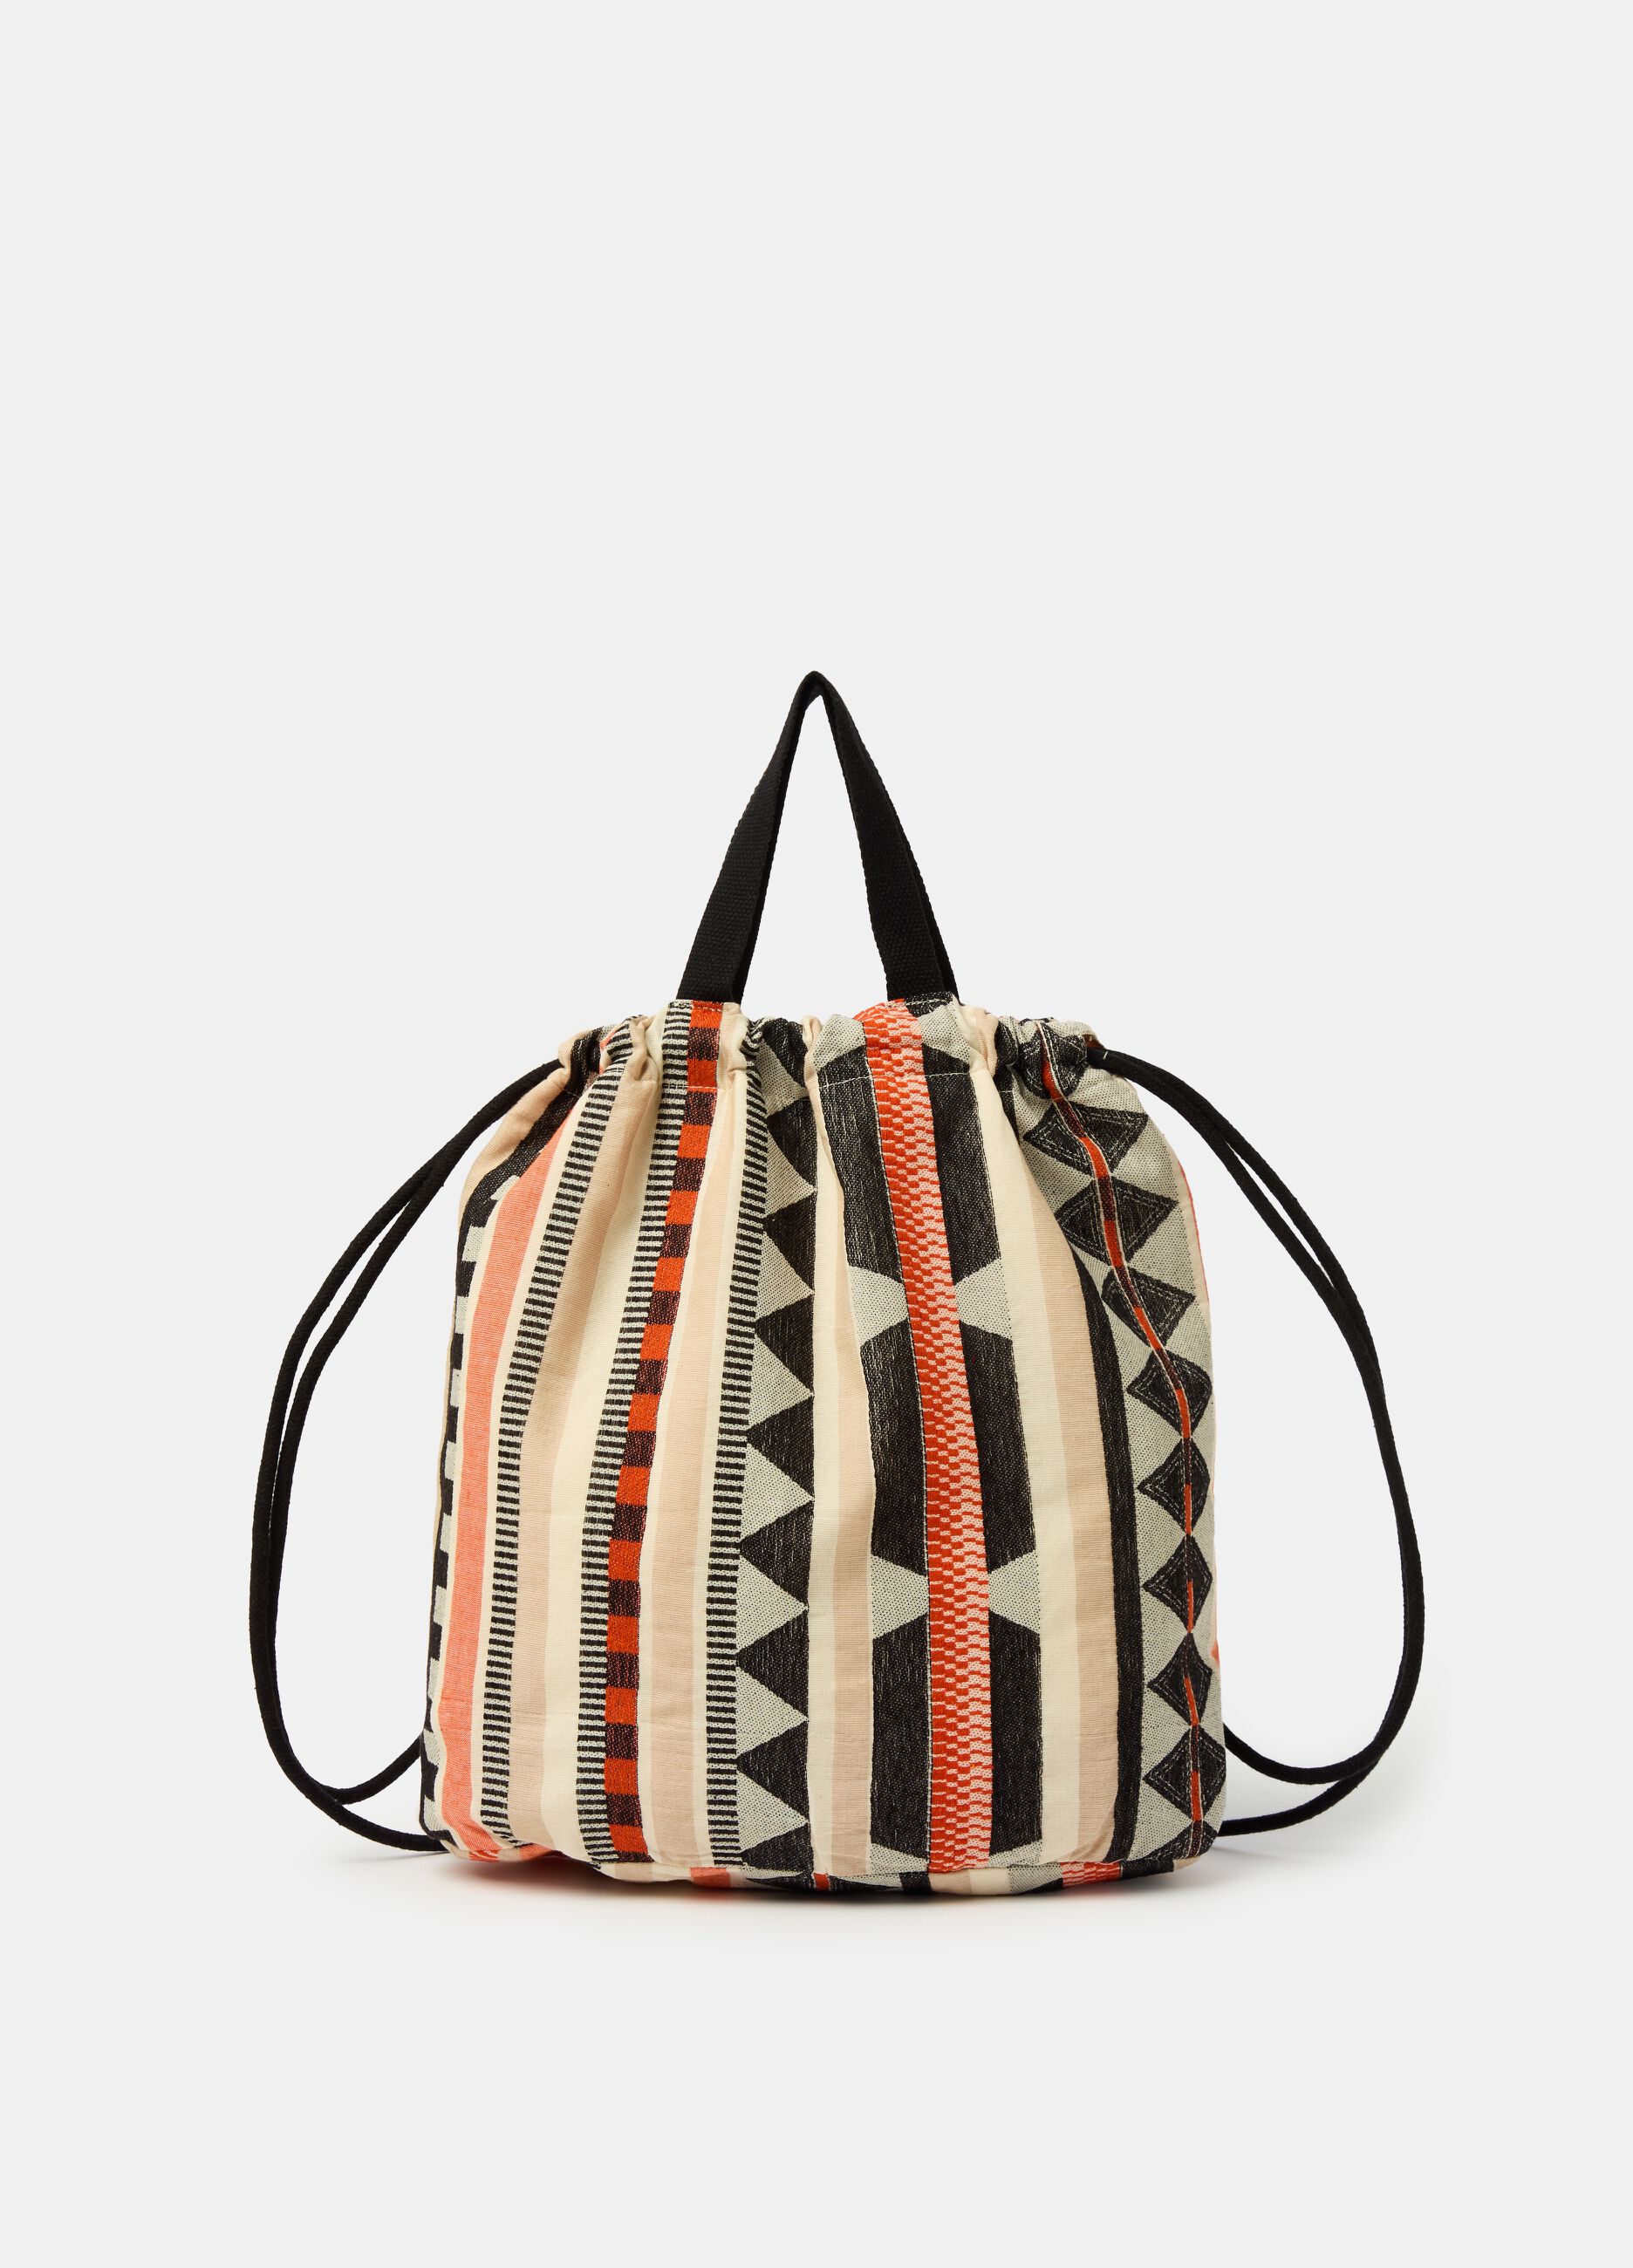 Cotton sack backpack with ethnic pattern